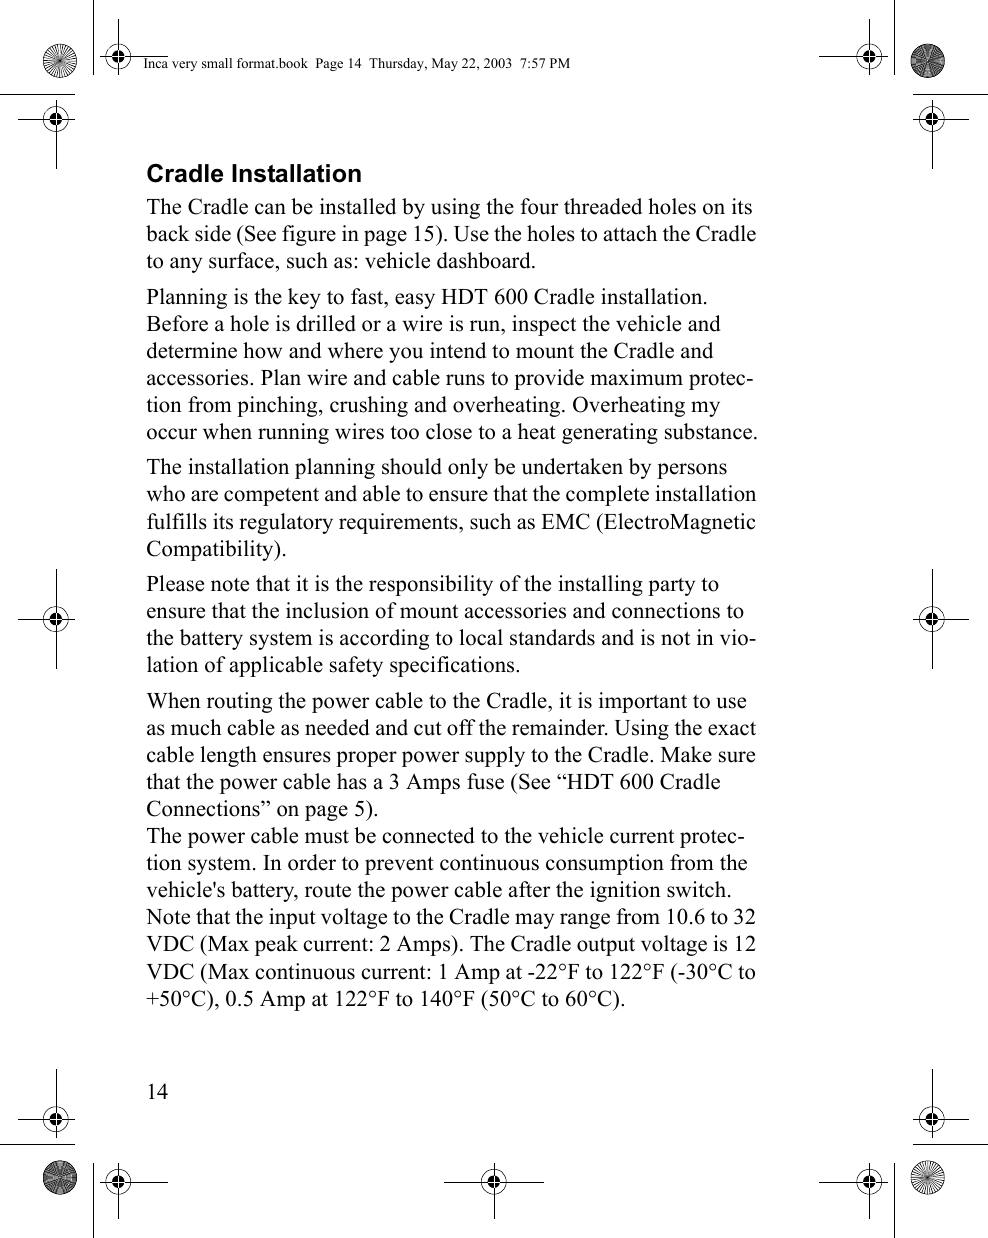 14Cradle InstallationThe Cradle can be installed by using the four threaded holes on its back side (See figure in page 15). Use the holes to attach the Cradle to any surface, such as: vehicle dashboard. Planning is the key to fast, easy HDT 600 Cradle installation. Before a hole is drilled or a wire is run, inspect the vehicle and determine how and where you intend to mount the Cradle and accessories. Plan wire and cable runs to provide maximum protec-tion from pinching, crushing and overheating. Overheating my occur when running wires too close to a heat generating substance.The installation planning should only be undertaken by persons who are competent and able to ensure that the complete installation fulfills its regulatory requirements, such as EMC (ElectroMagnetic Compatibility).Please note that it is the responsibility of the installing party to ensure that the inclusion of mount accessories and connections to the battery system is according to local standards and is not in vio-lation of applicable safety specifications. When routing the power cable to the Cradle, it is important to use as much cable as needed and cut off the remainder. Using the exact cable length ensures proper power supply to the Cradle. Make sure that the power cable has a 3 Amps fuse (See “HDT 600 Cradle Connections” on page 5). The power cable must be connected to the vehicle current protec-tion system. In order to prevent continuous consumption from the vehicle&apos;s battery, route the power cable after the ignition switch. Note that the input voltage to the Cradle may range from 10.6 to 32 VDC (Max peak current: 2 Amps). The Cradle output voltage is 12 VDC (Max continuous current: 1 Amp at -22°F to 122°F (-30°C to +50°C), 0.5 Amp at 122°F to 140°F (50°C to 60°C).Inca very small format.book  Page 14  Thursday, May 22, 2003  7:57 PM